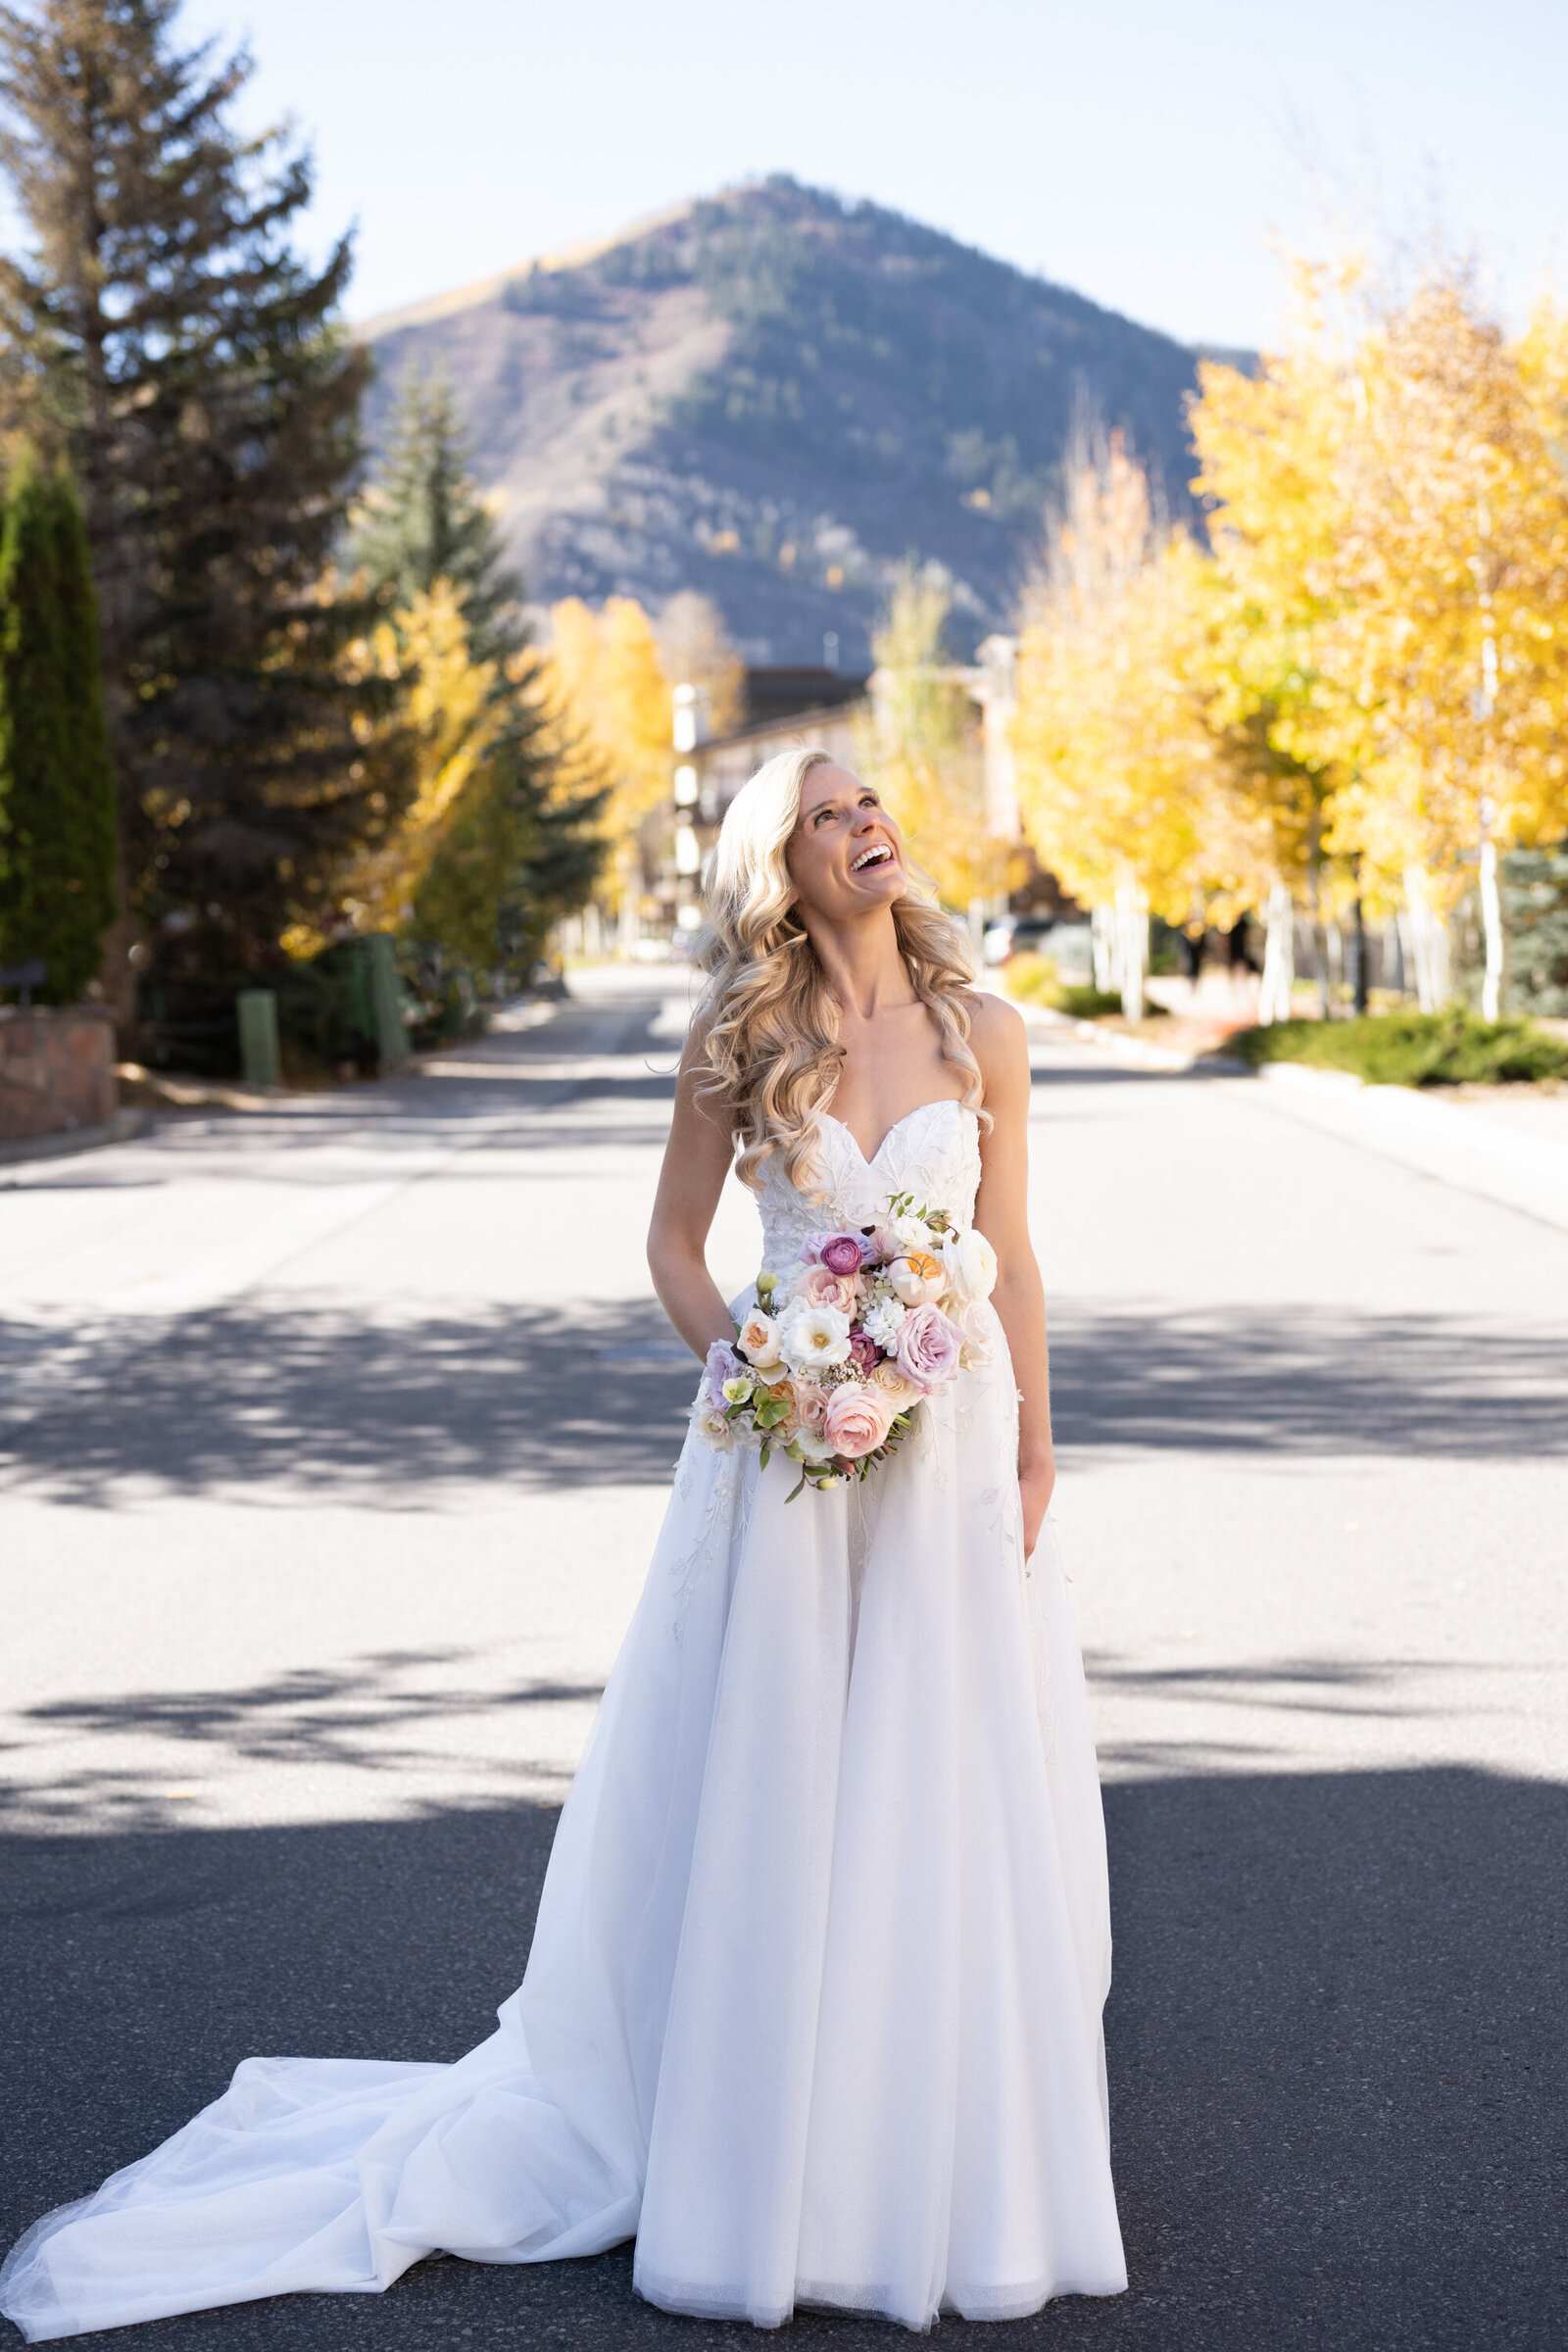 A bride stands in front of a mountaintop.